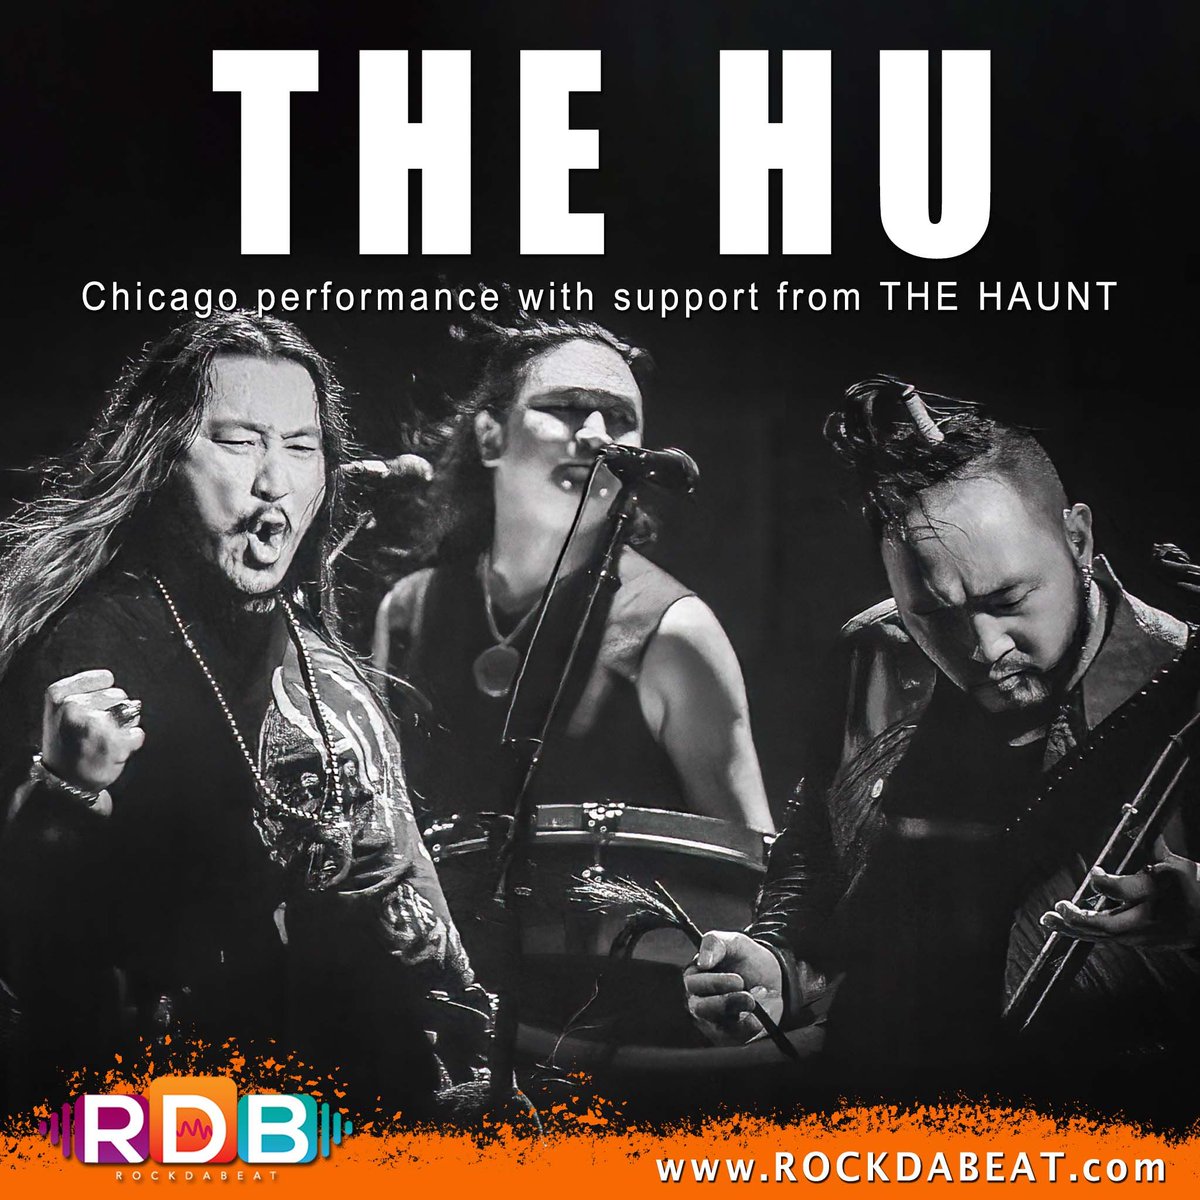 Check out our photos from @TheHuOfficial concert in Chicago! #mongolianhardrock #mongolianmetal with tour openers @WeAreTheHaunt at buff.ly/3EKdpVo
#heavymetal #hardwork